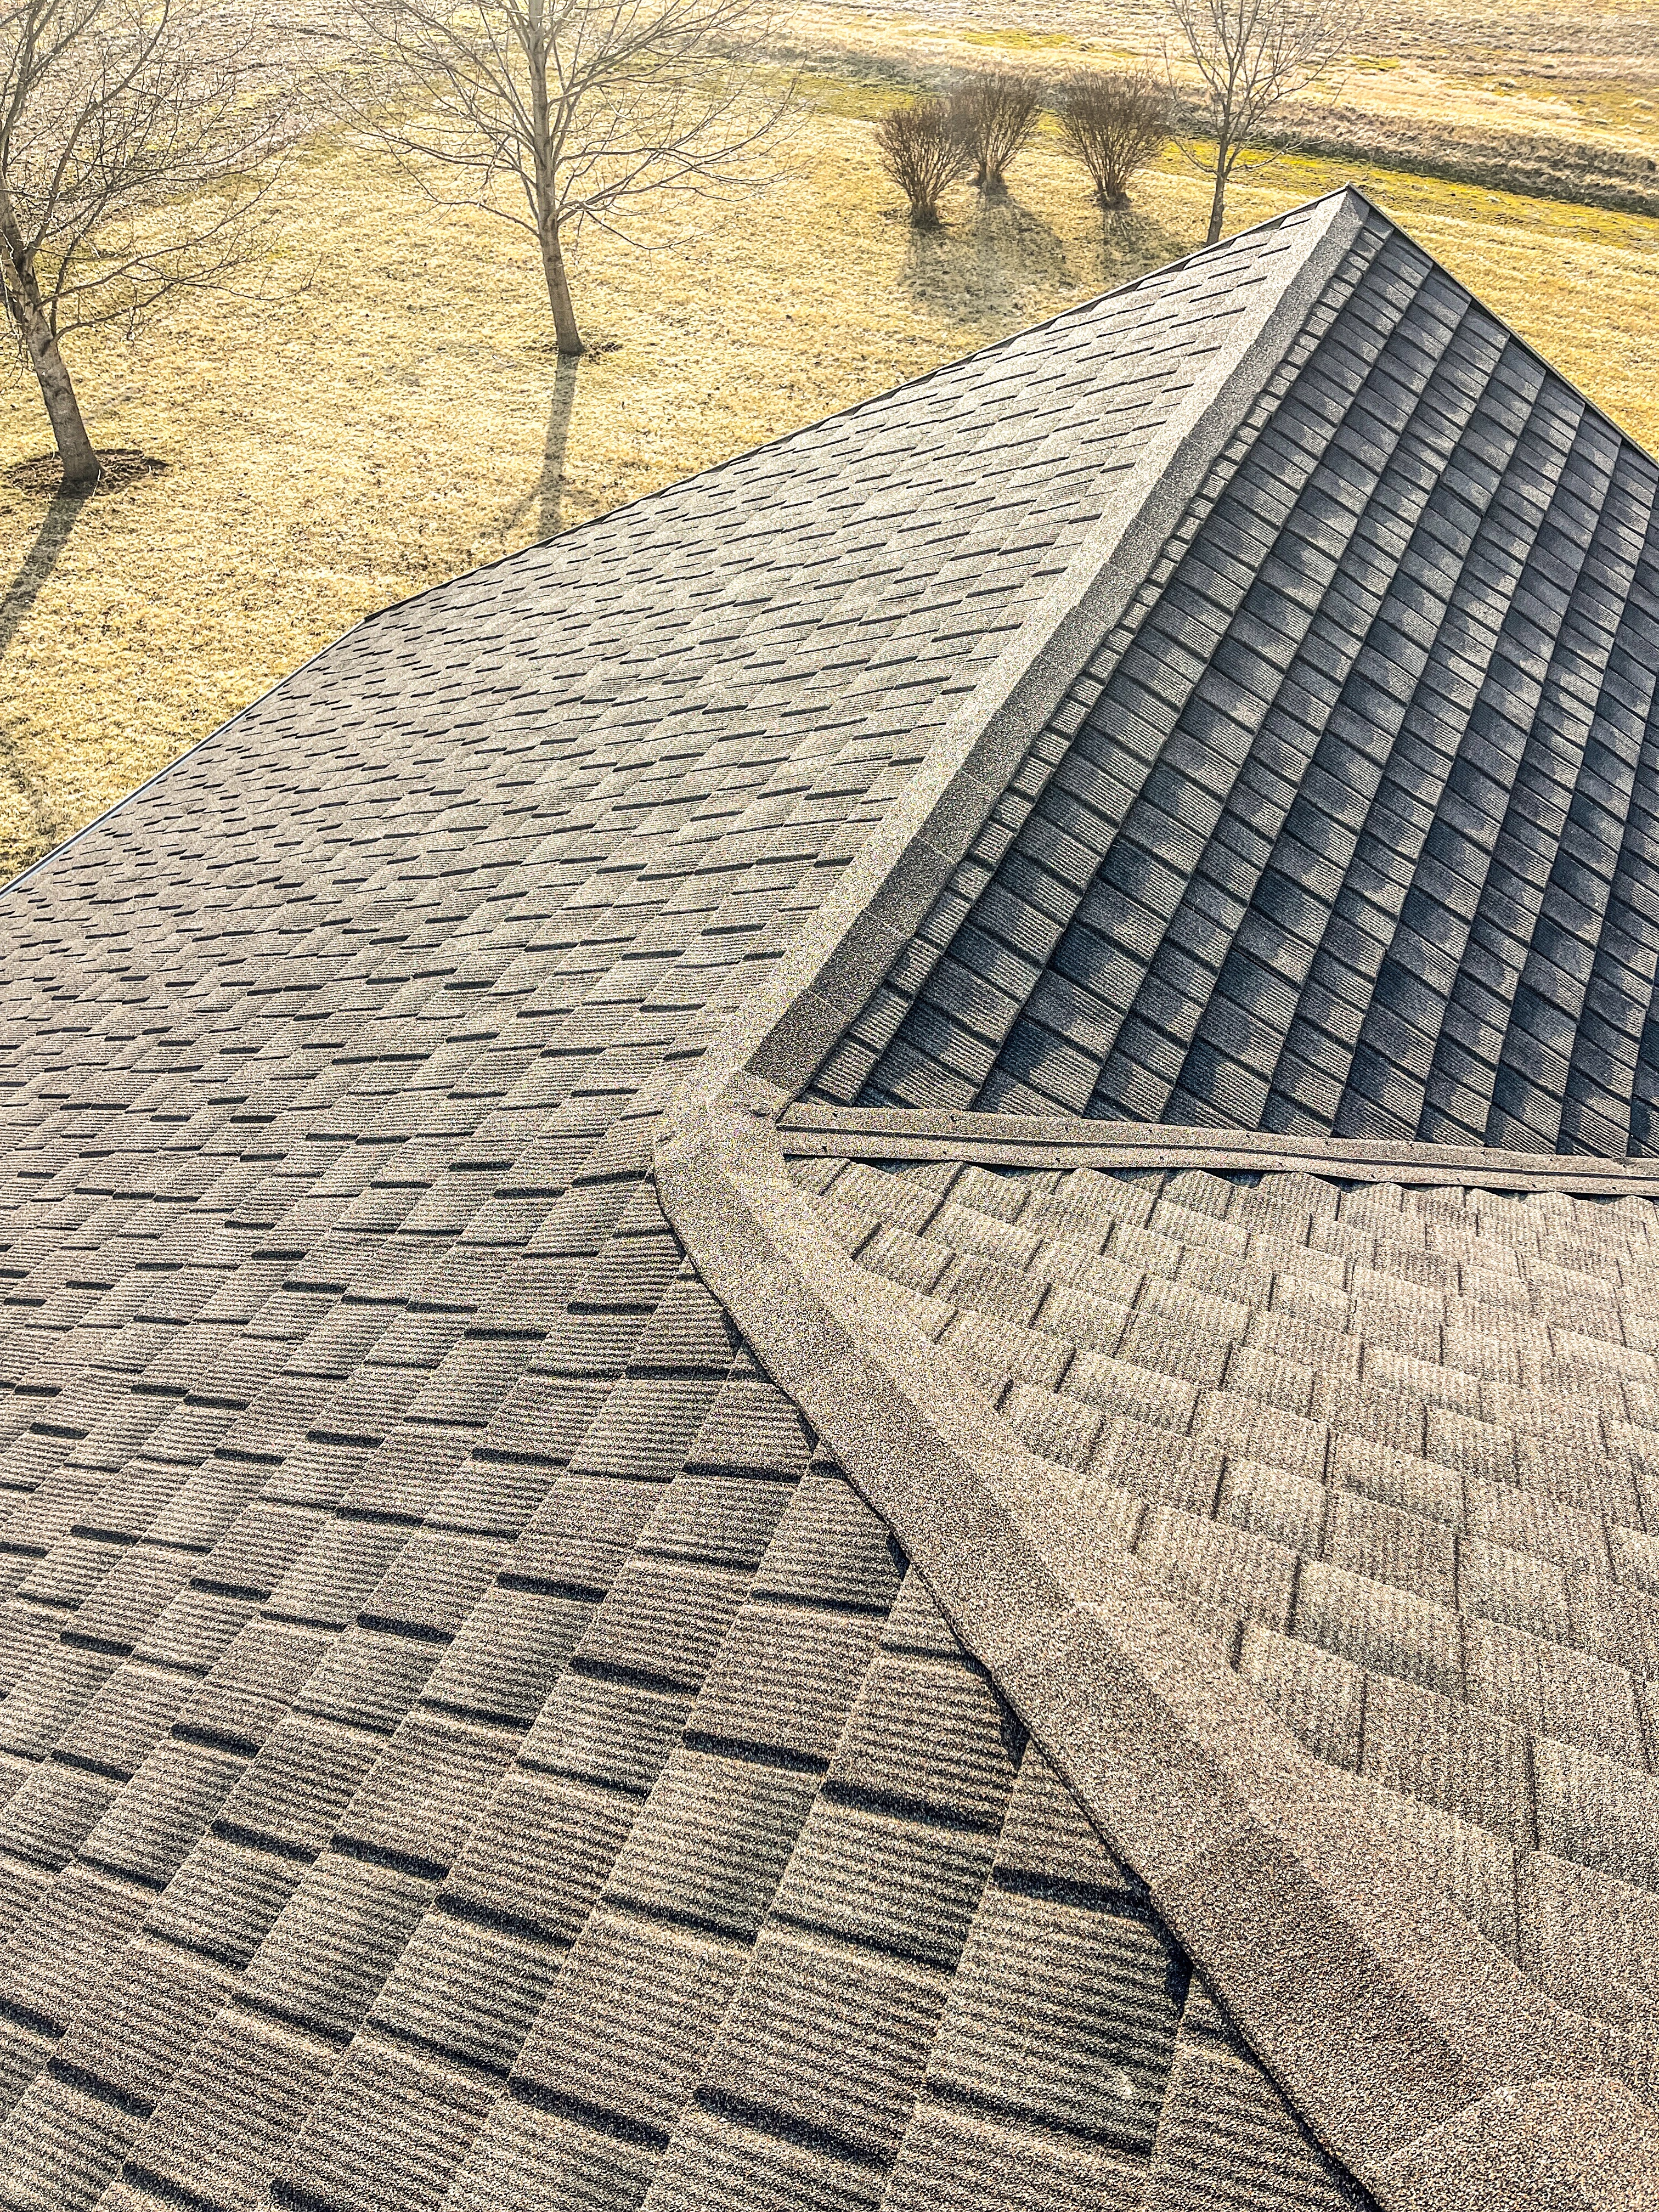 Image of a Tilcor Roof overview. You can see a new armored roof on a residential home. There are gray shingles and yellow grass down below. 